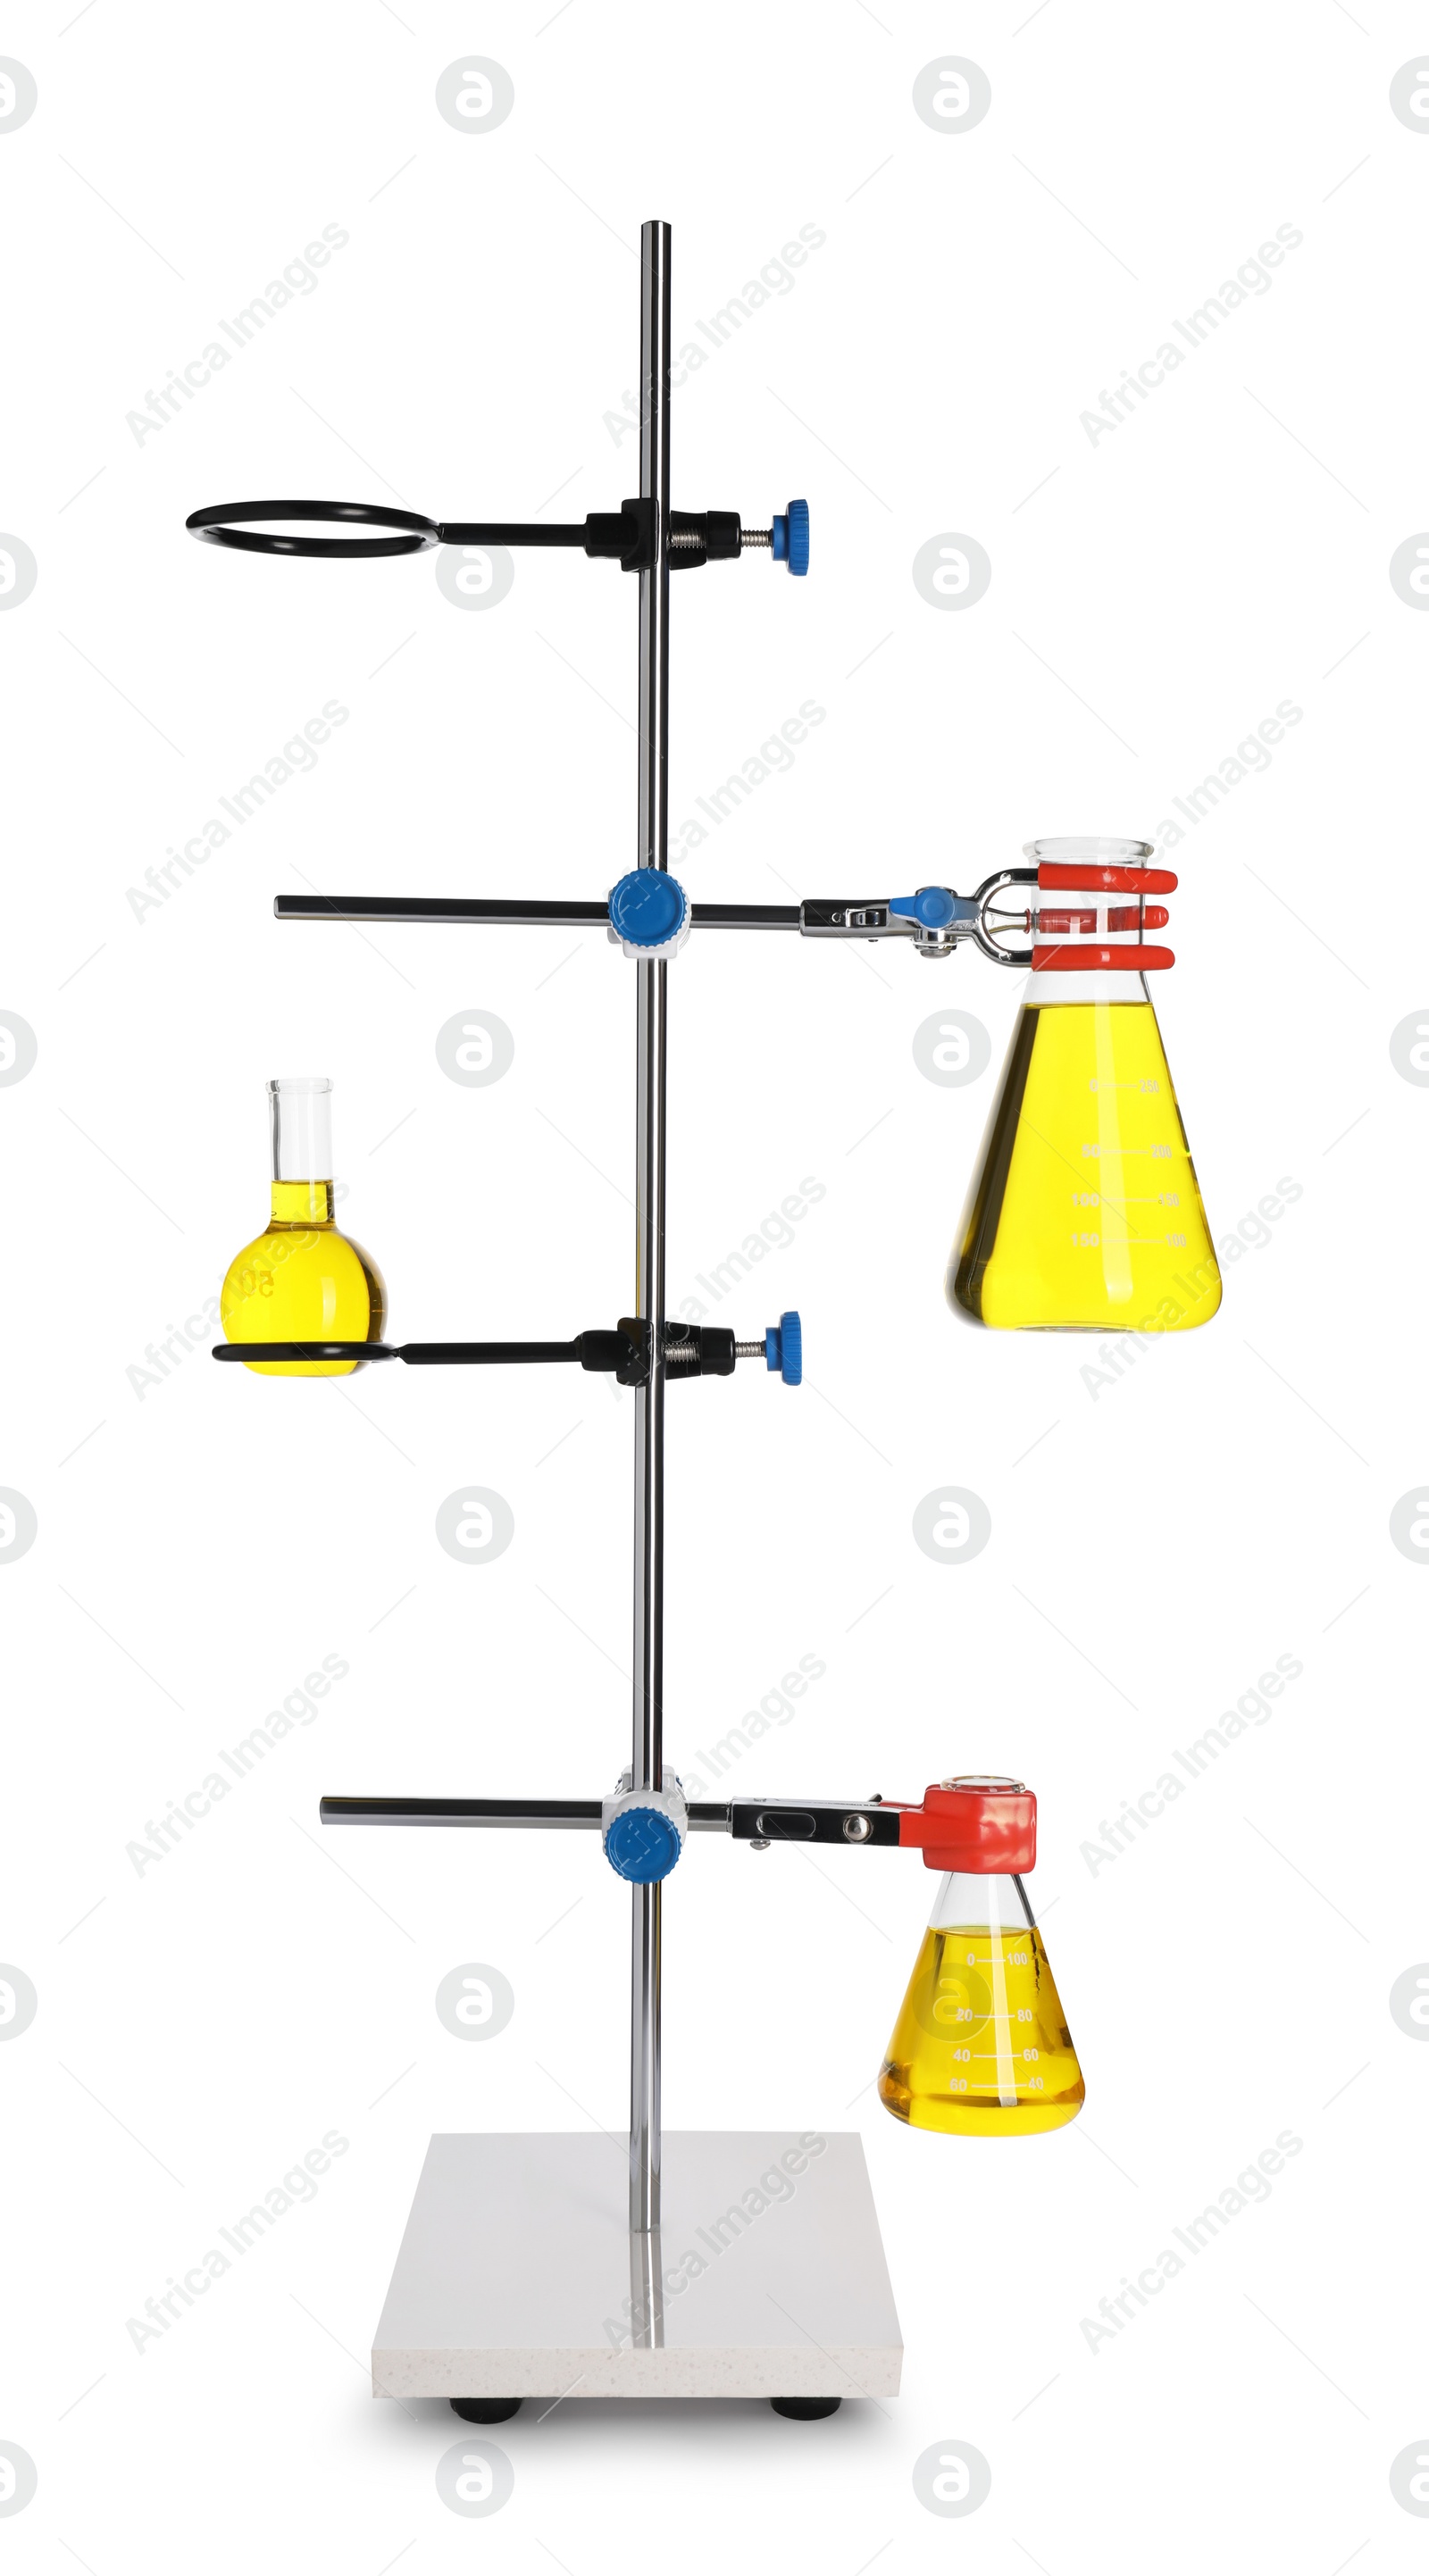 Photo of Retort stand with flasks of yellow liquid isolated on white